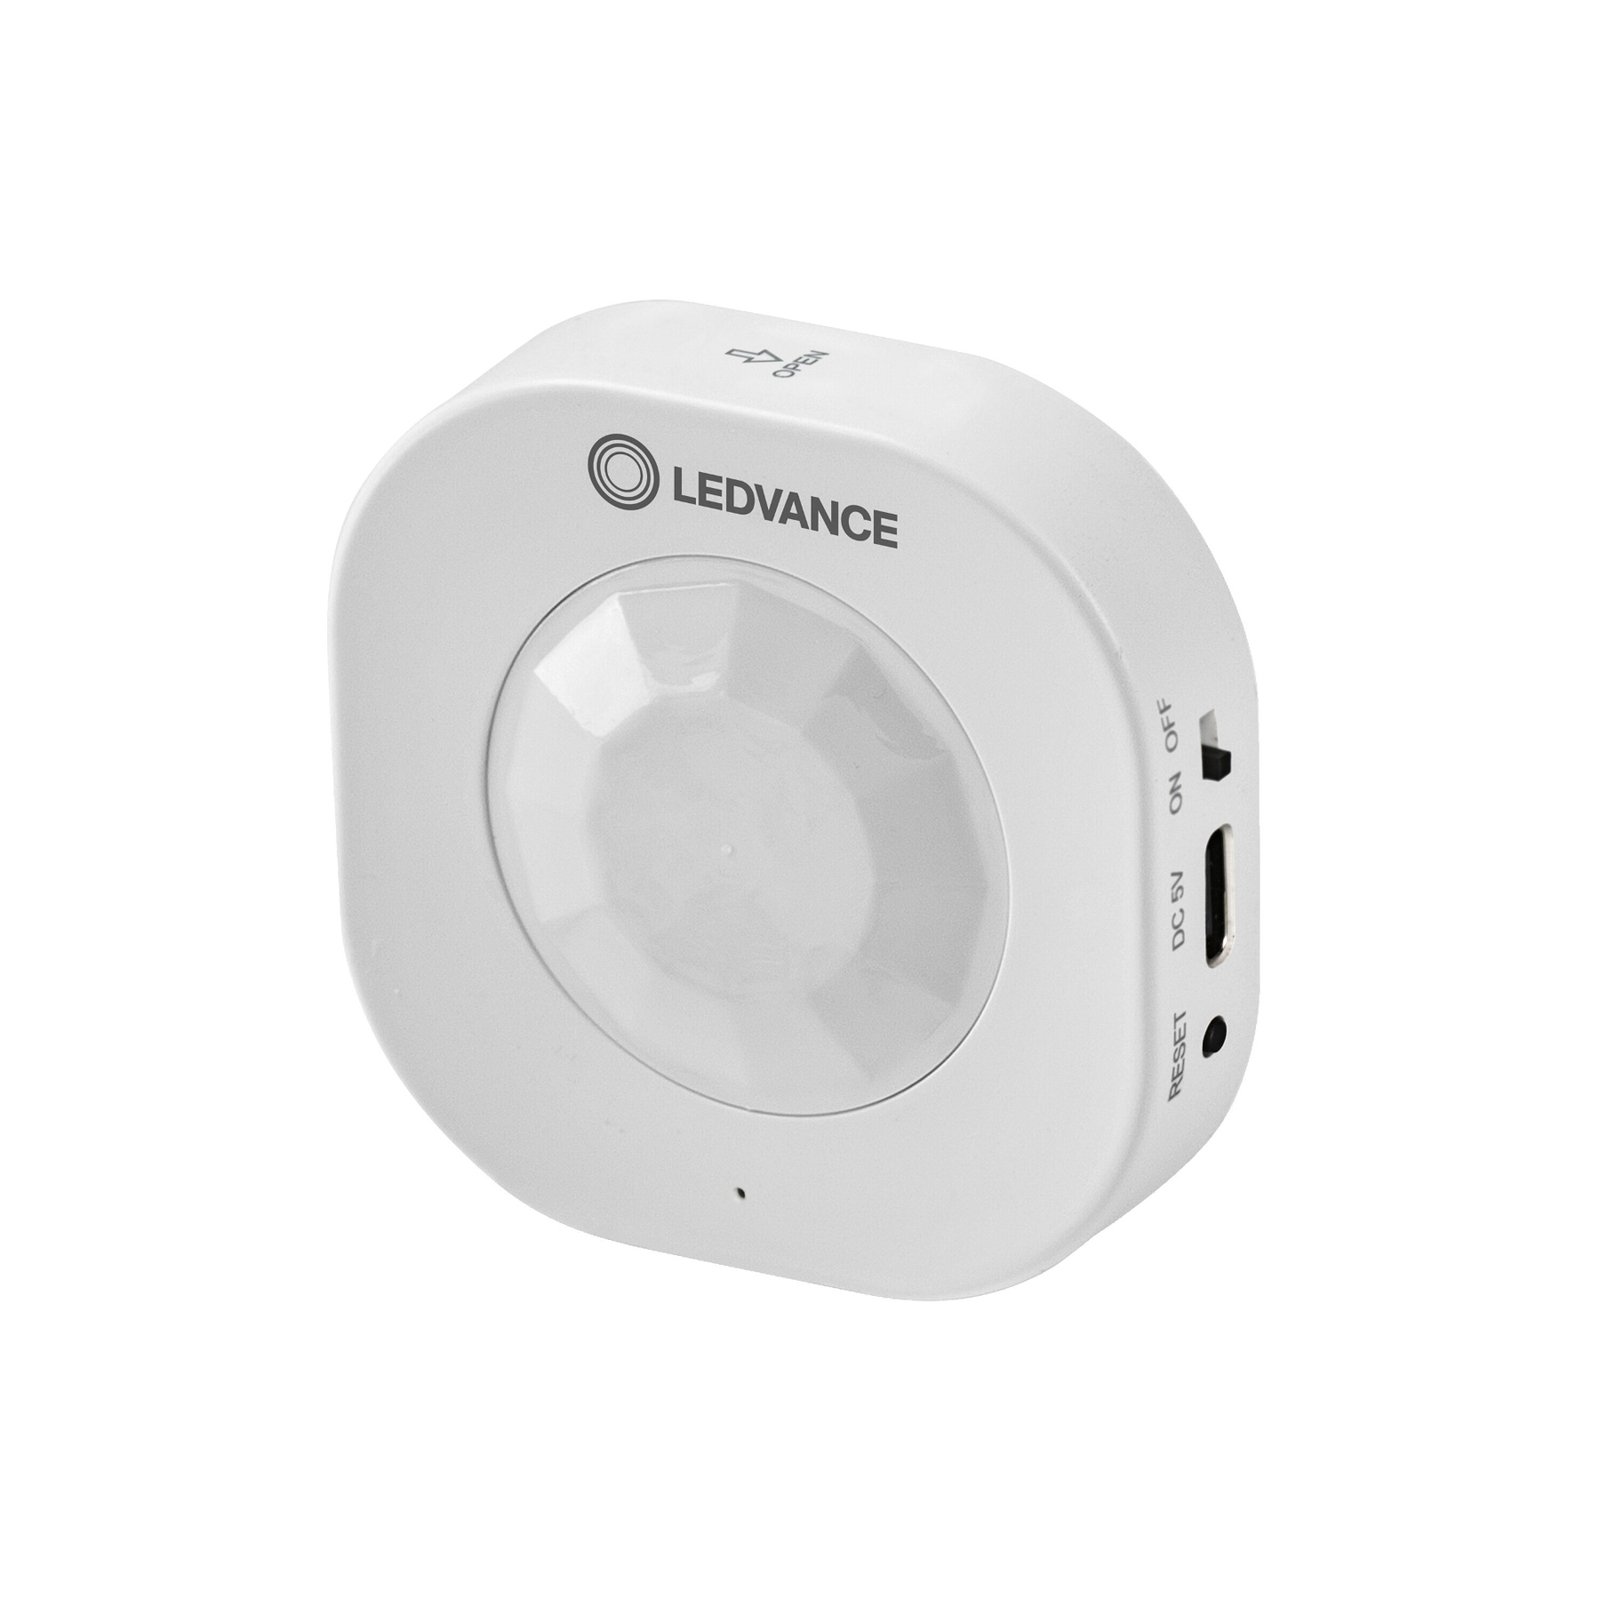 LEDVANCE SMART+ Motion sensor, WiFi, with rechargeable battery